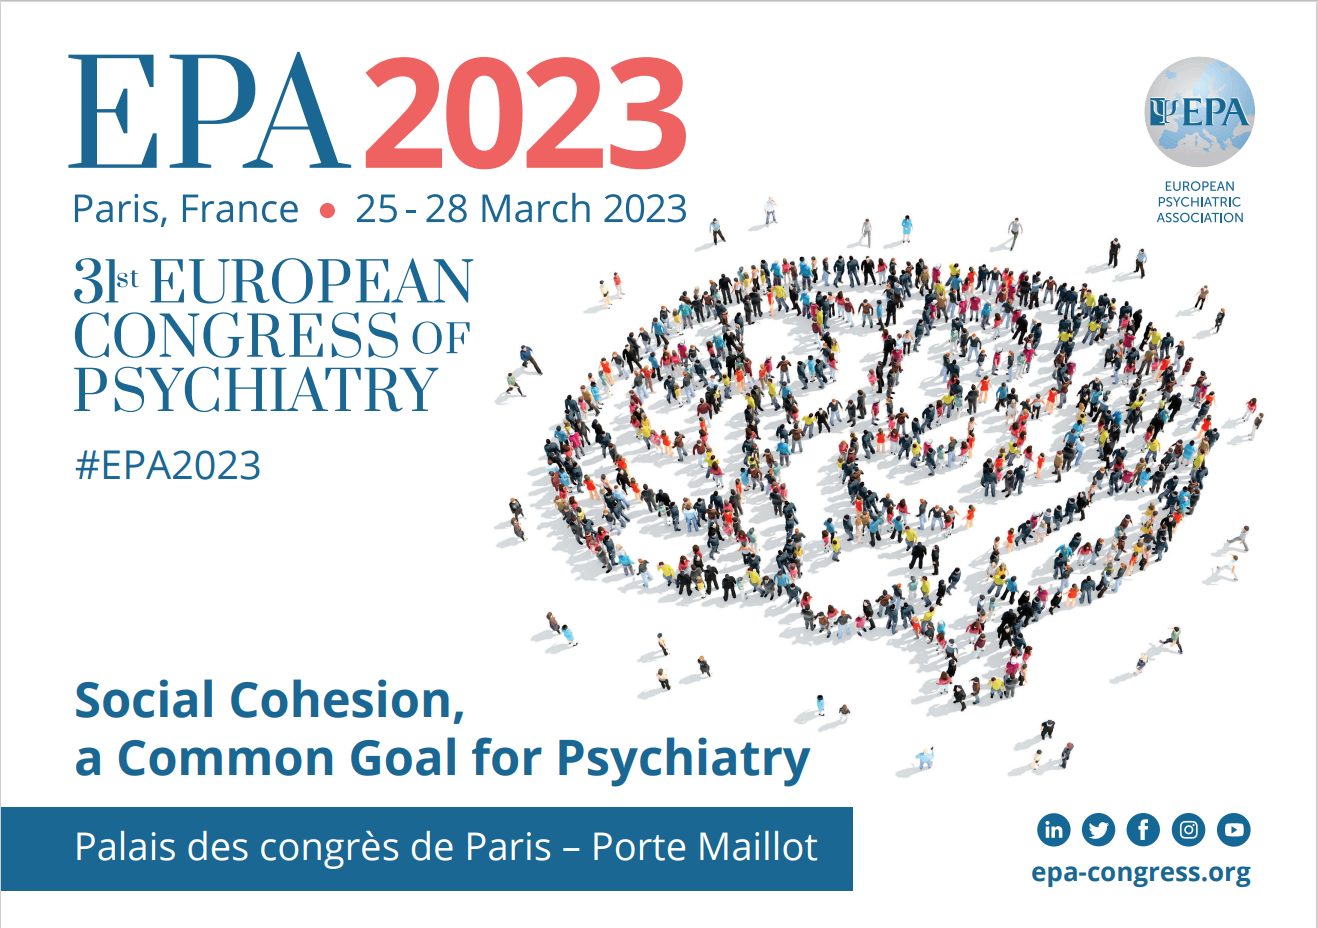 Surpassing Registration Goals: Psychiatry Congress Digital Marketing Campaign Outperforms Target by 15%